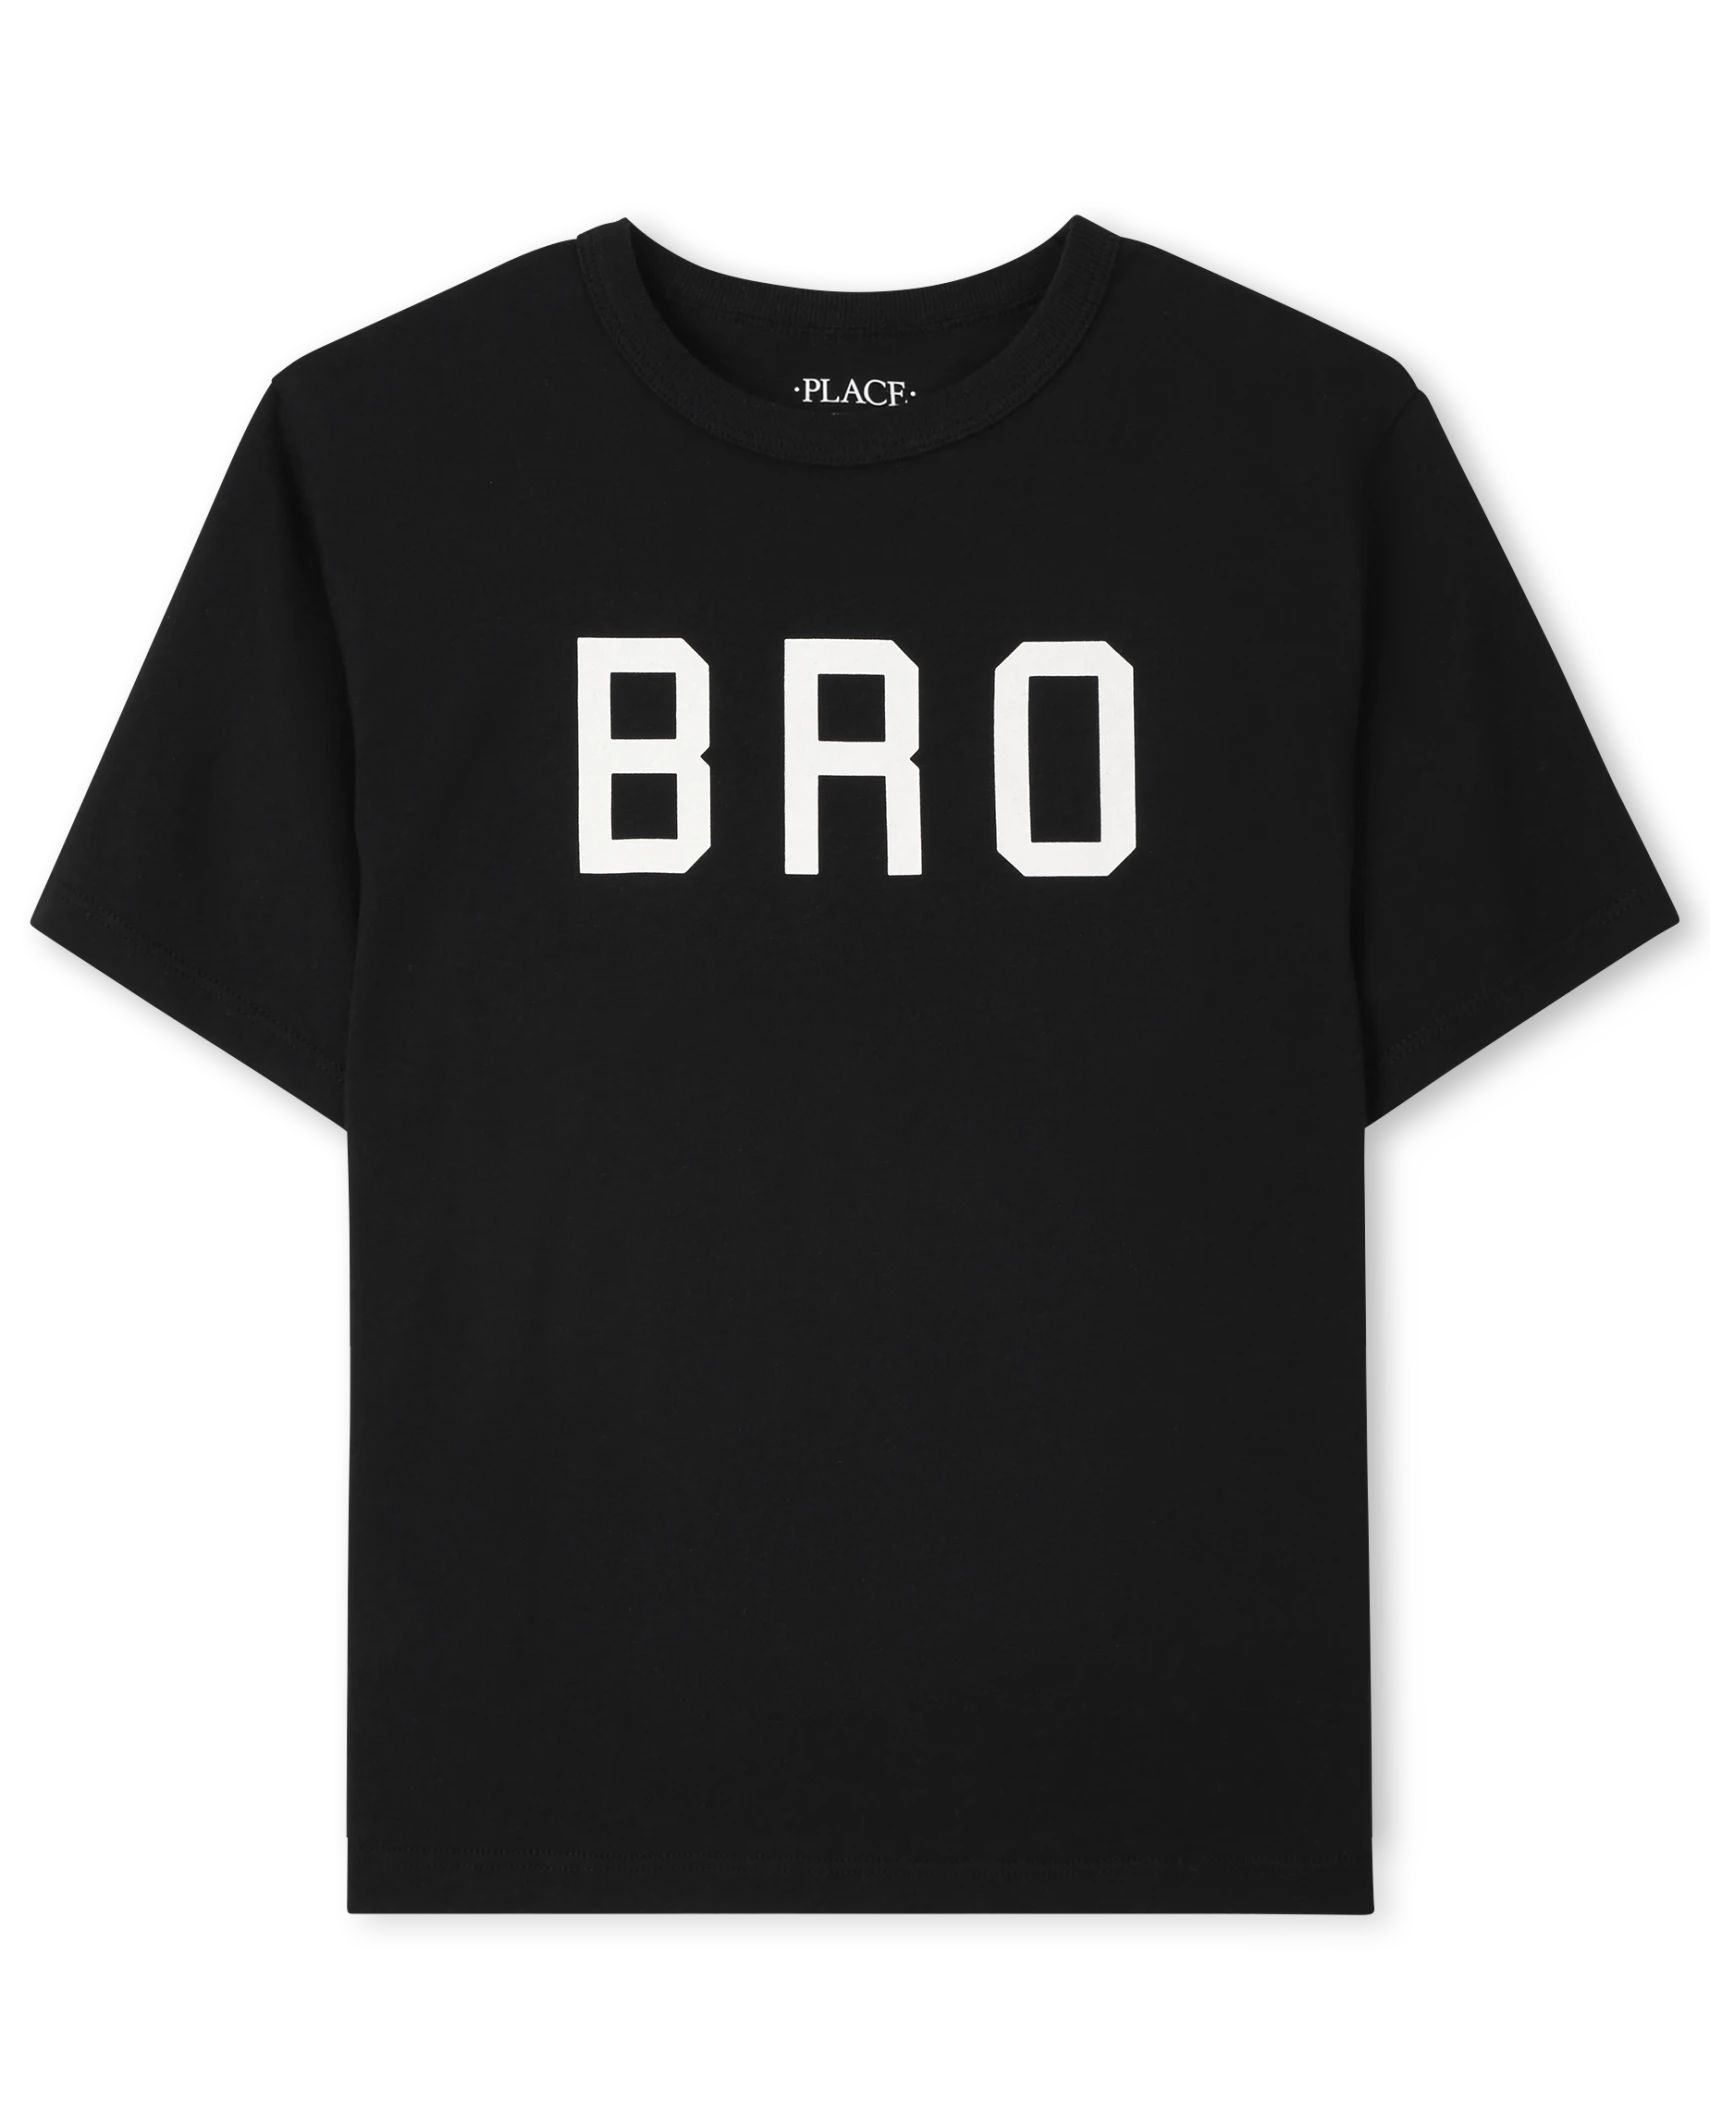 Boys Matching Family Bro Graphic Tee - black | The Children's Place